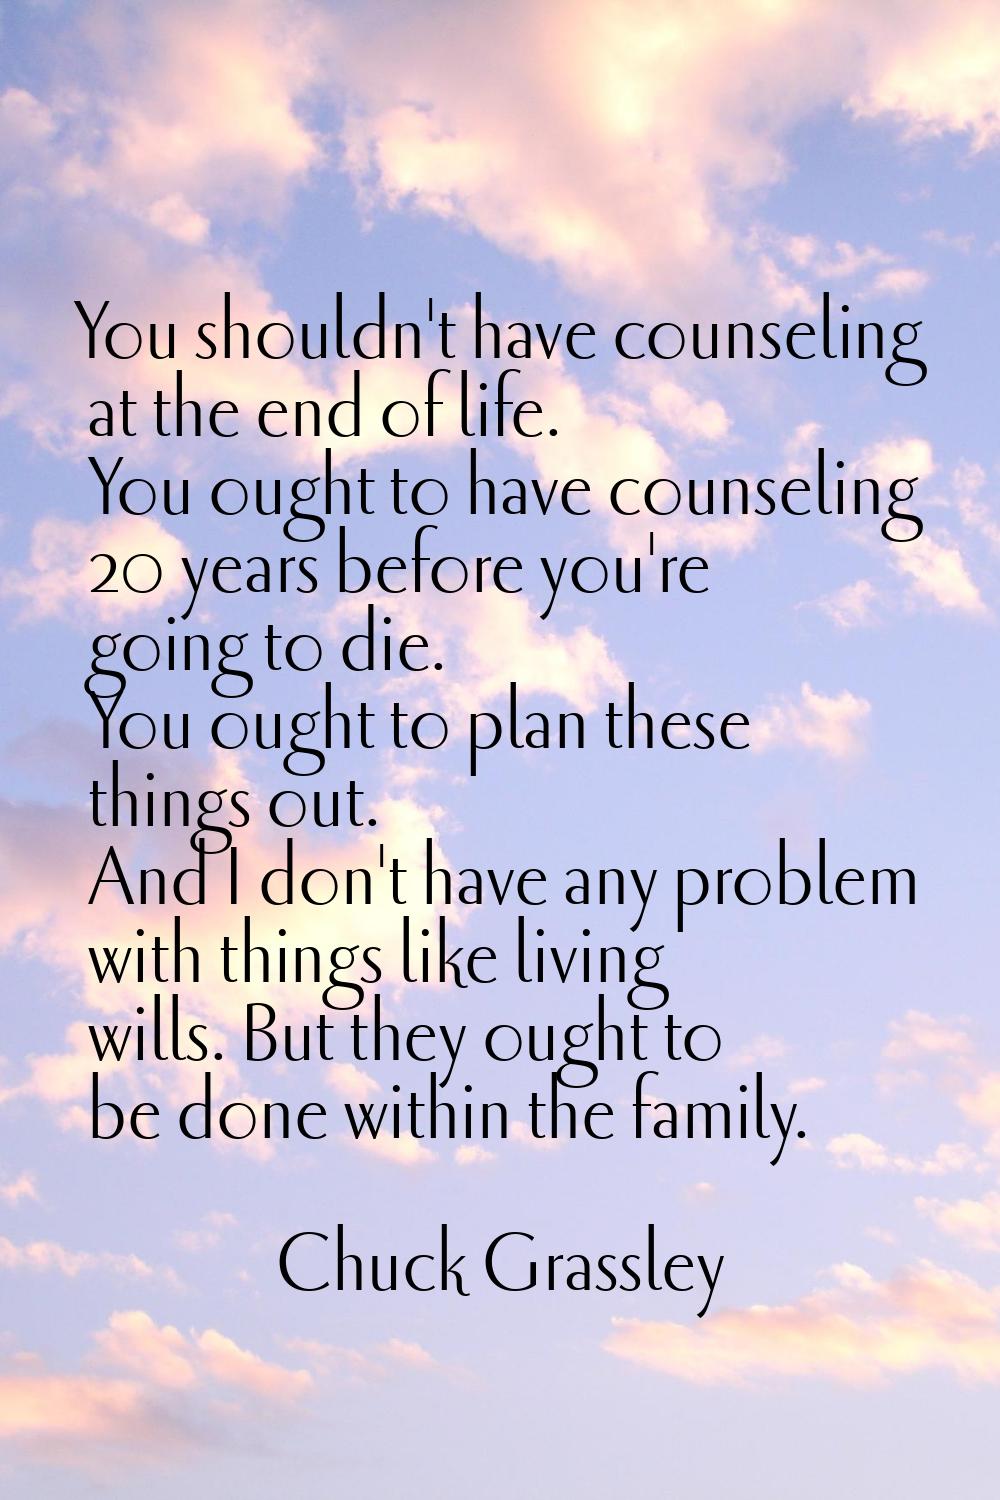 You shouldn't have counseling at the end of life. You ought to have counseling 20 years before you'